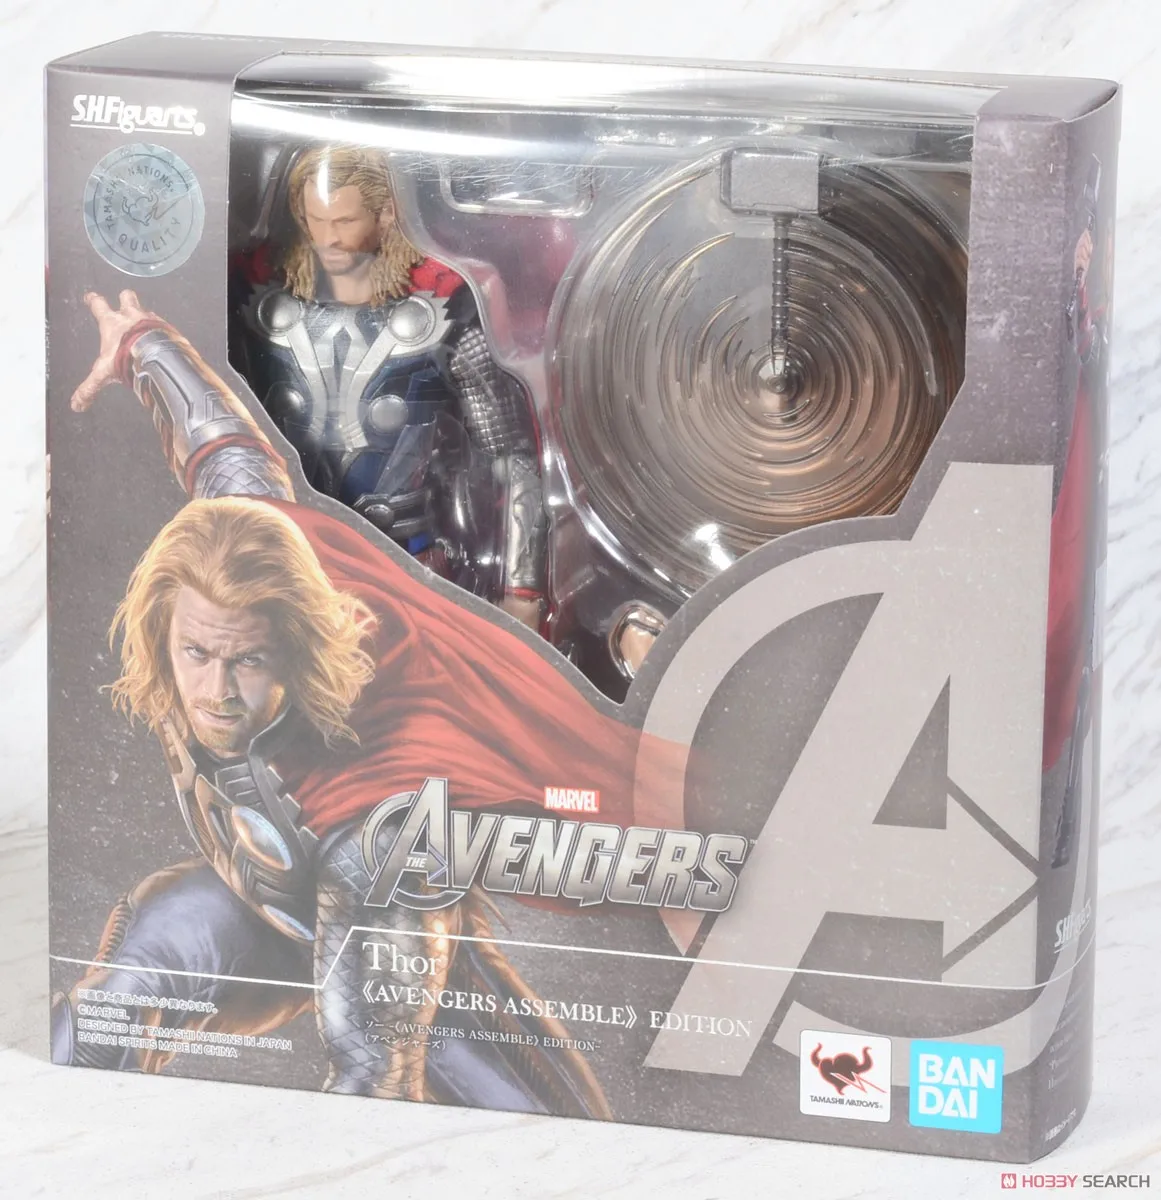 

BANDAI Original S.h.figuarts Thor Odinson Marvel The Avengers Action Figure Collection Model Toy Anime Toys Gift for Kids